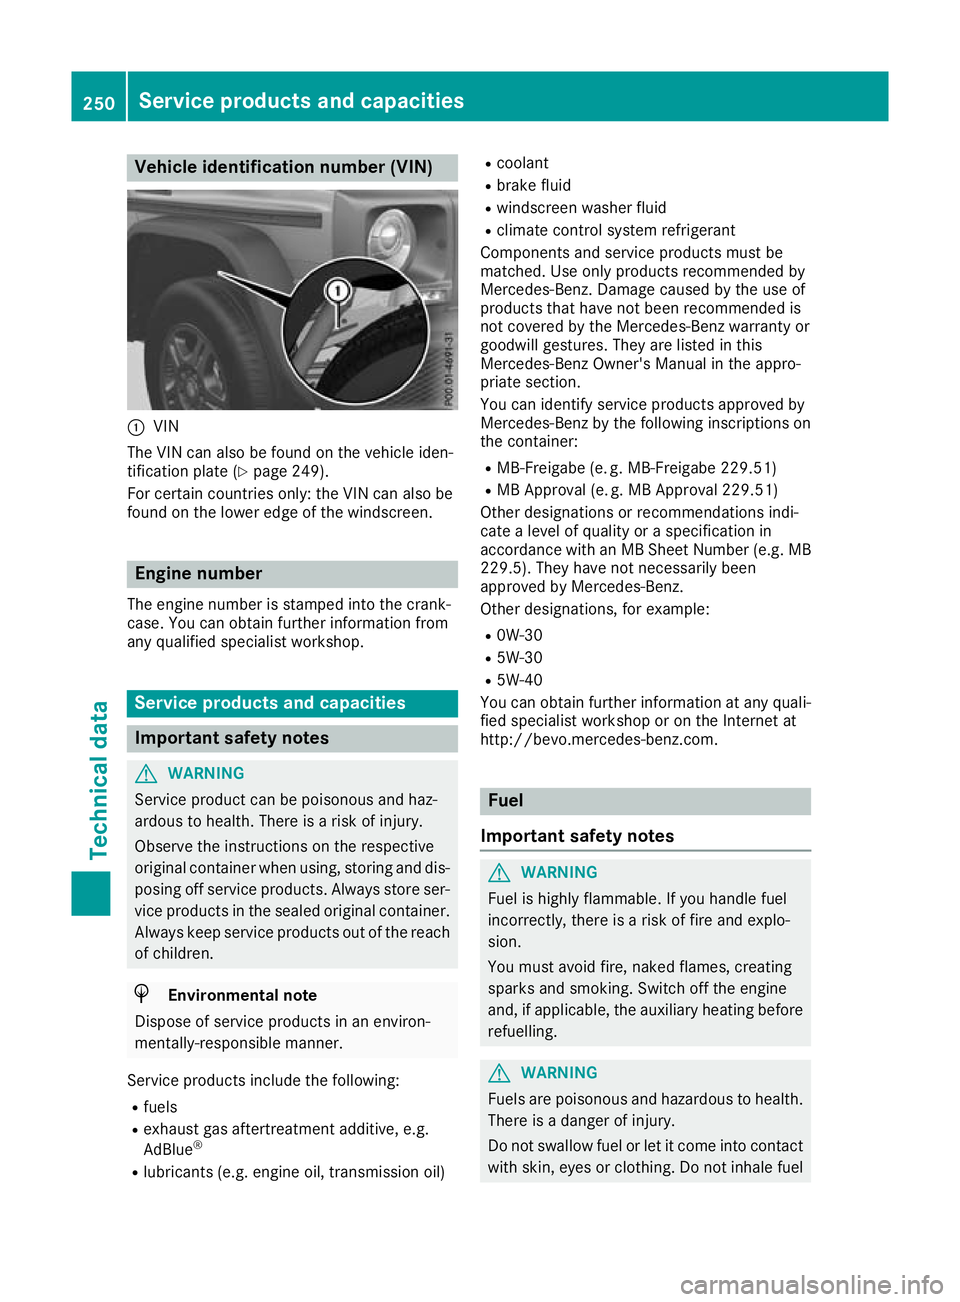 MERCEDES-BENZ G-CLASS SUV 2016  Owners Manual Vehicl
eidentificatio nnumber (VIN) :
VIN
The VIN can alsobef ound on the vehicle iden-
tification plate (Y page 249).
For certain countries only: the VIN can also be
found on the lower edge of the wi